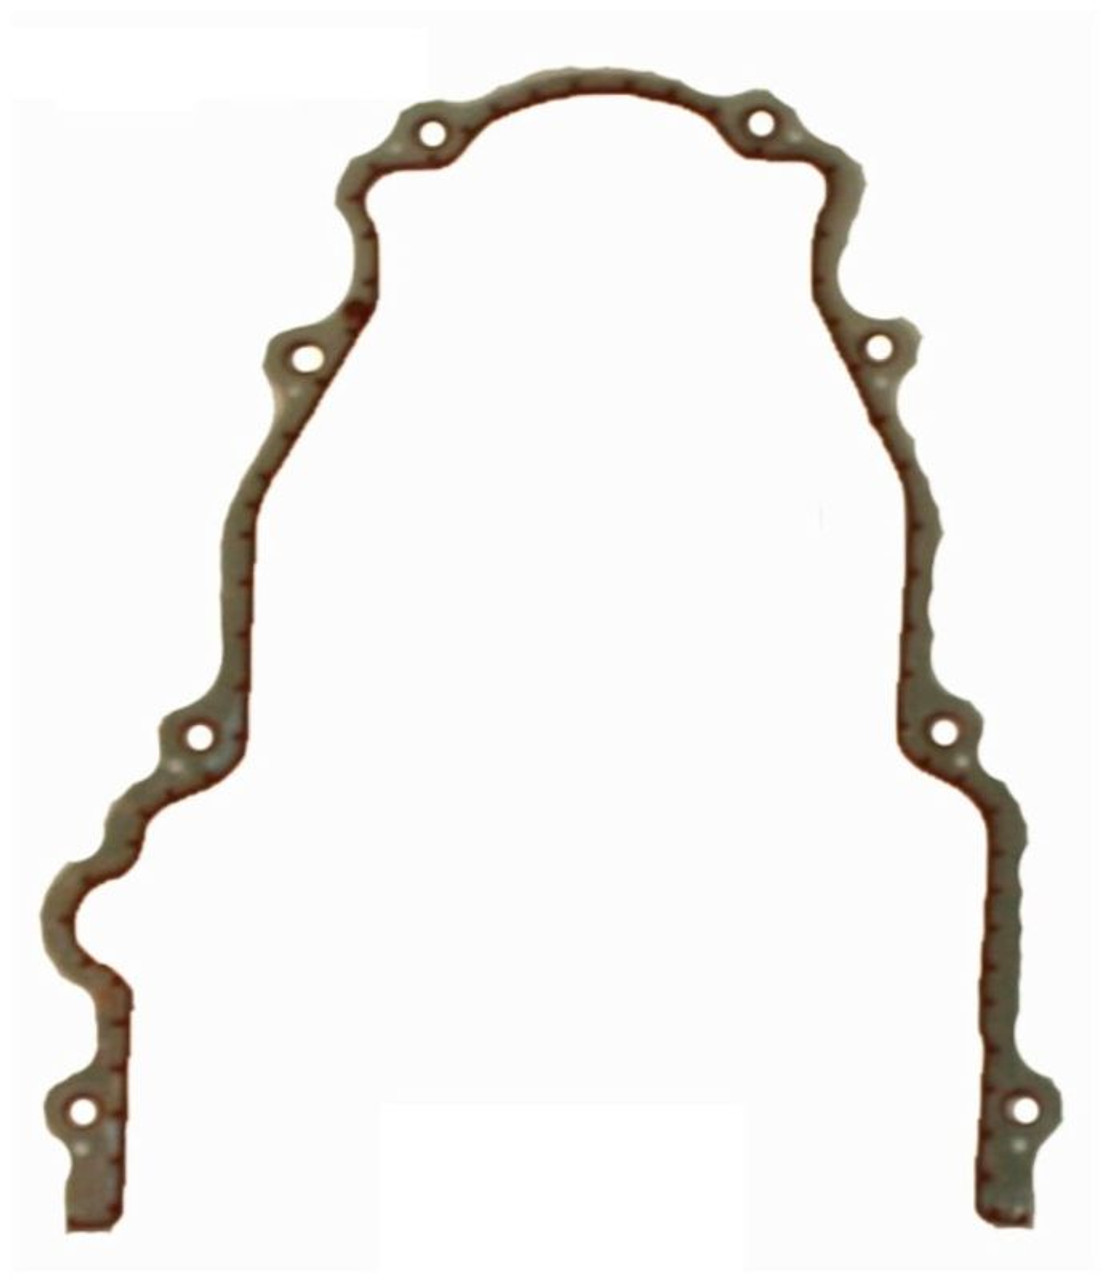 2013 Chevrolet Caprice 6.0L Engine Timing Cover Gasket TCG293-A -818